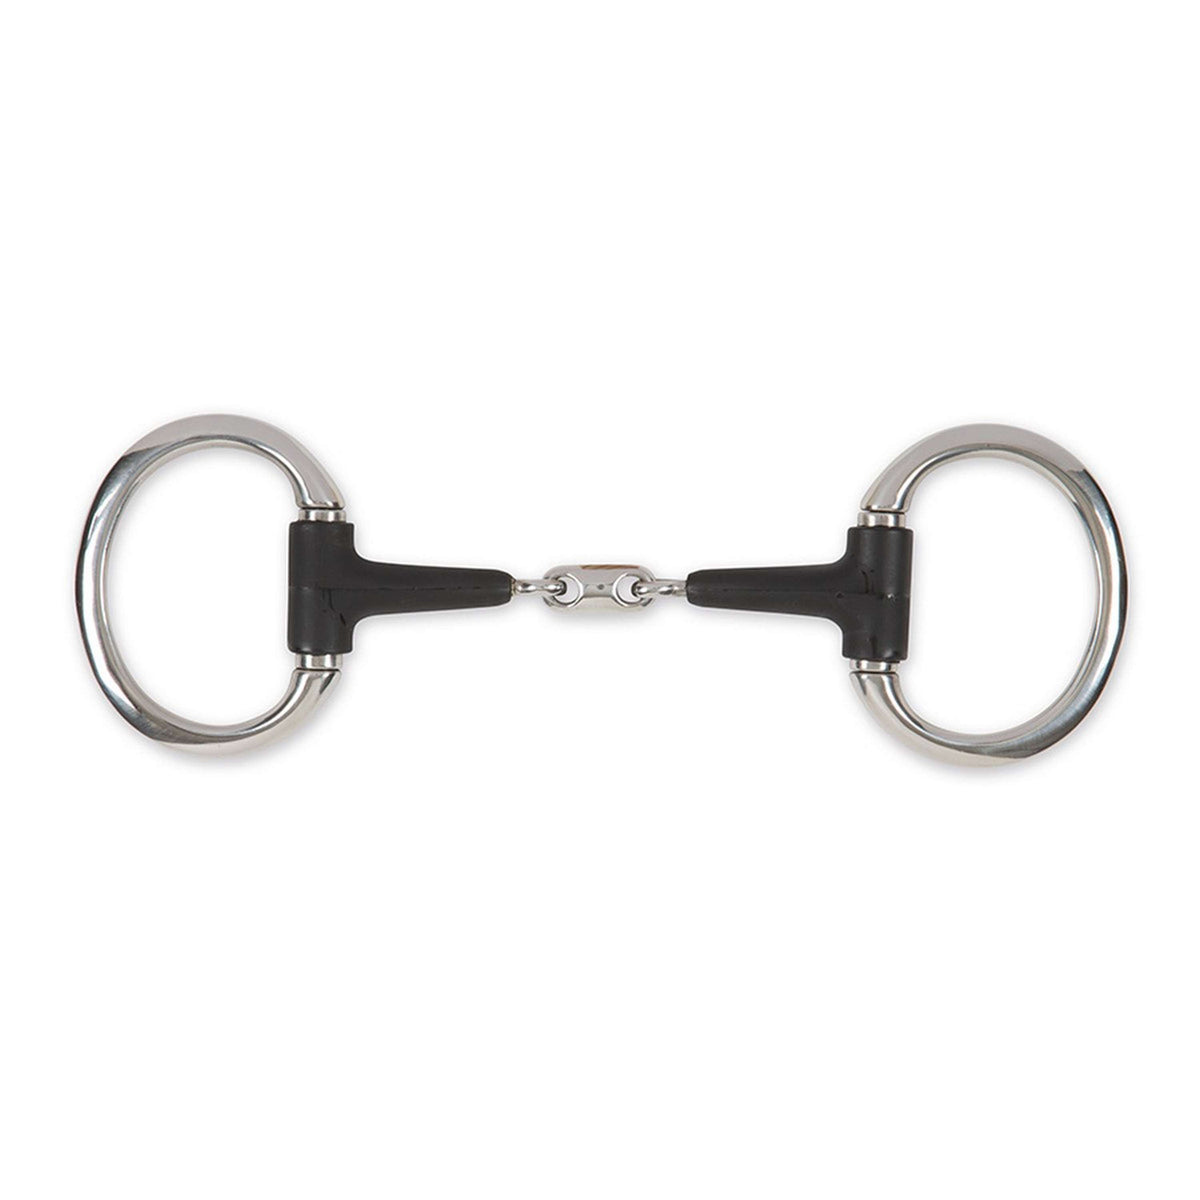 Equirubber by Shires Bustrense 15mm Doppelt Gebrochen